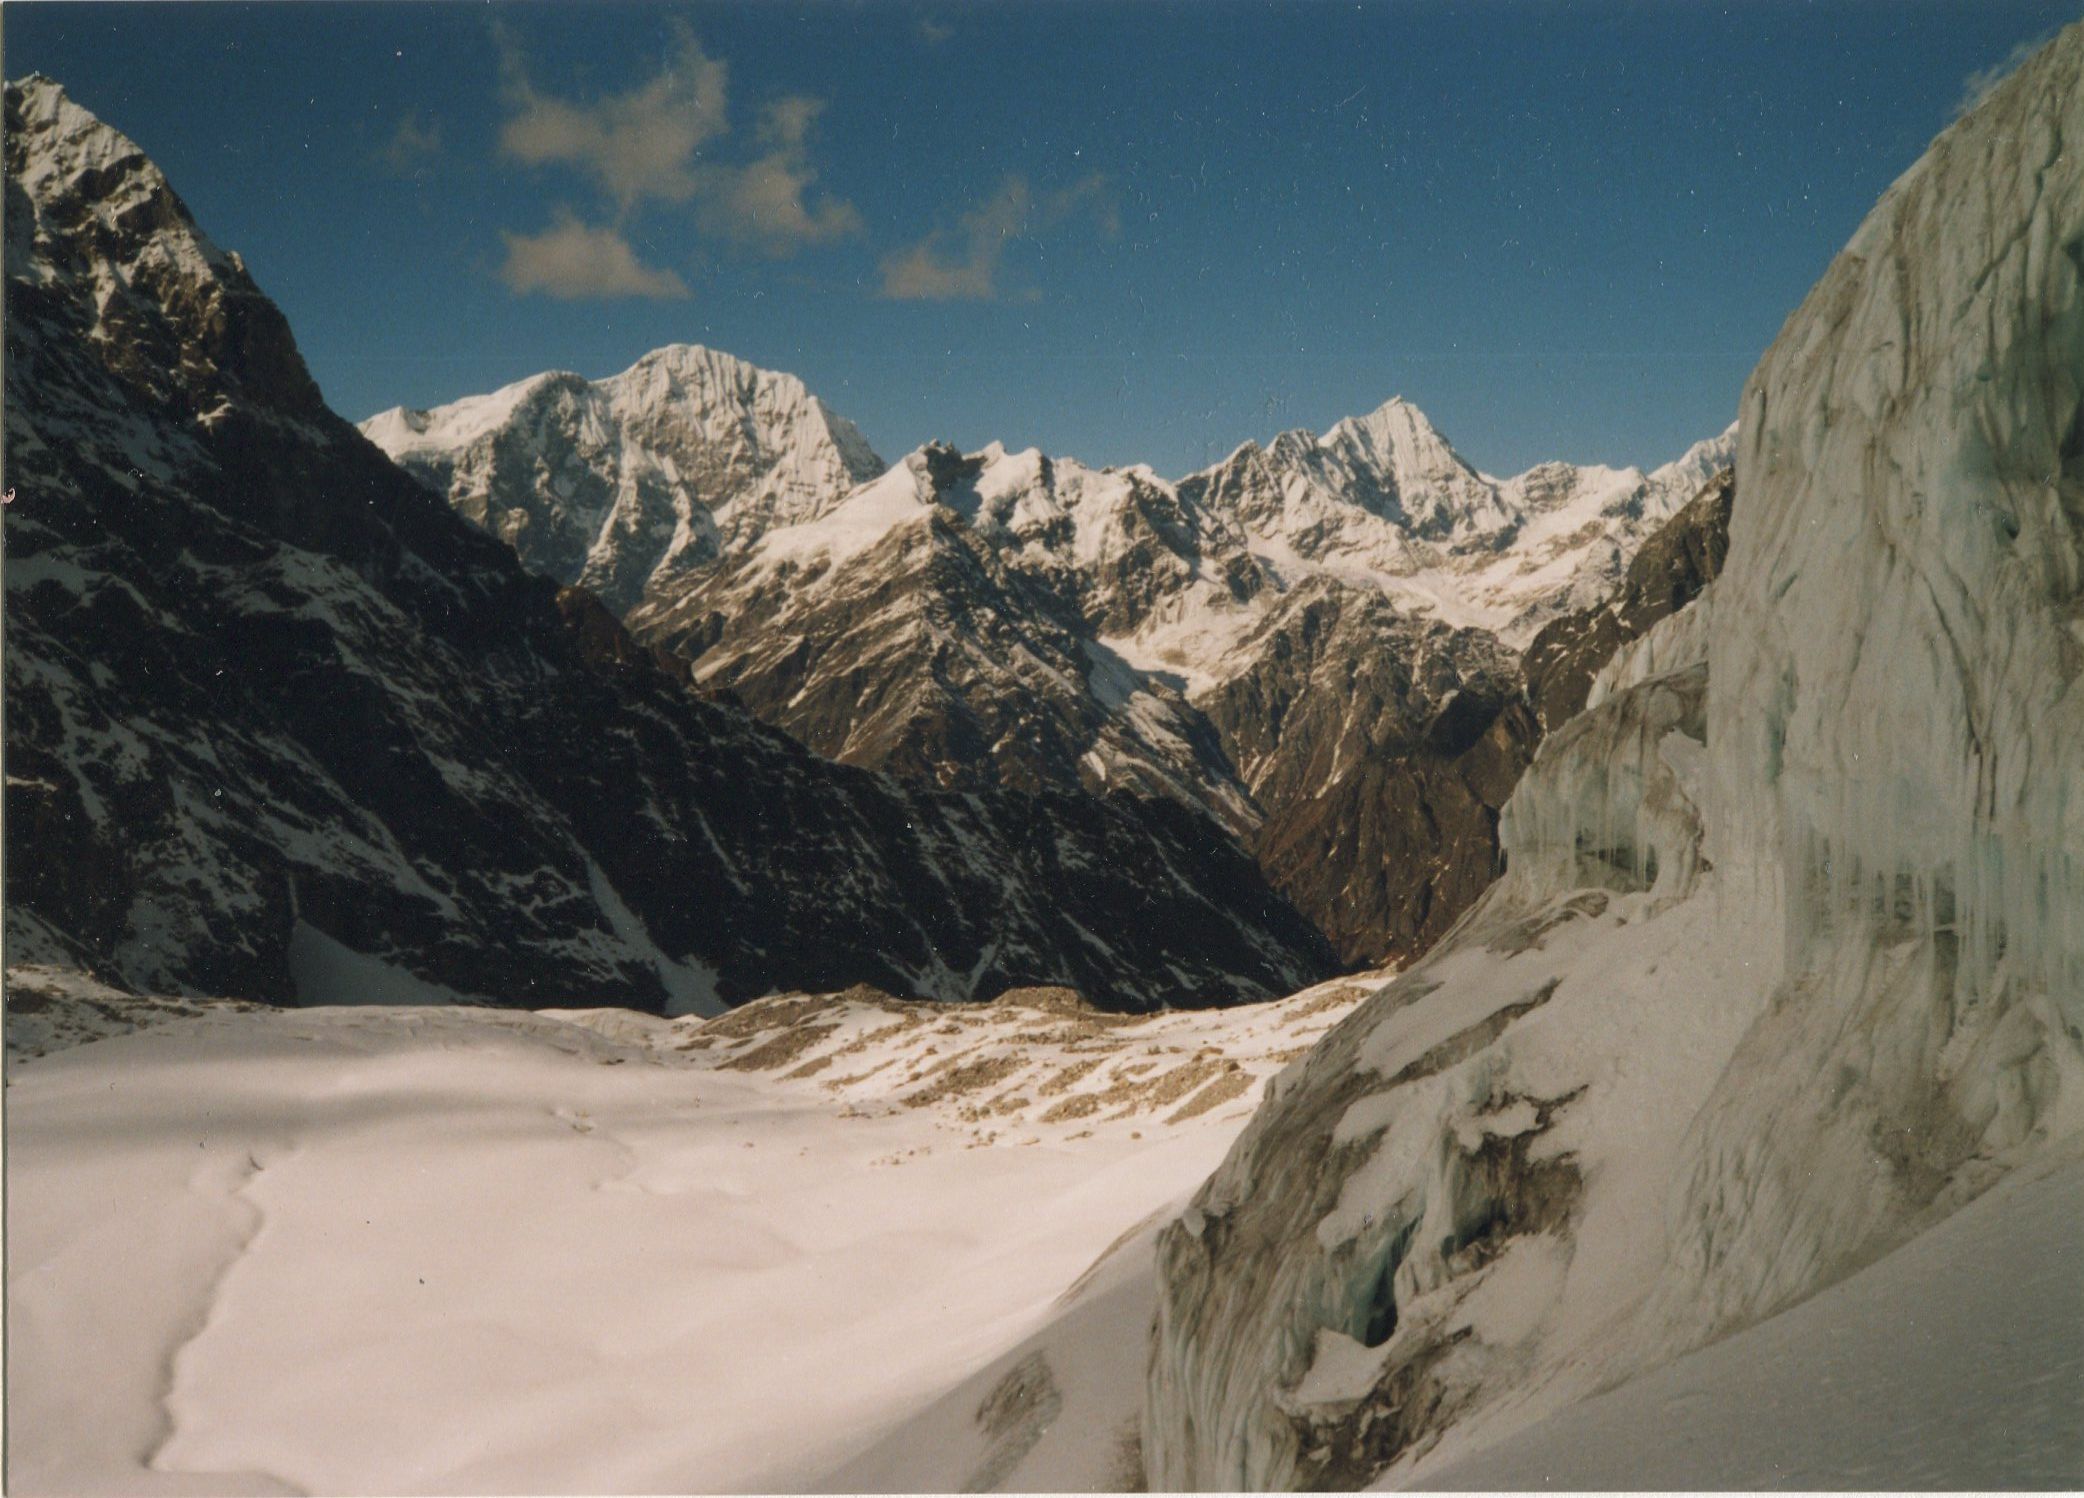 Shalbachum in Langtang Himal on descent from Tilman's Pass